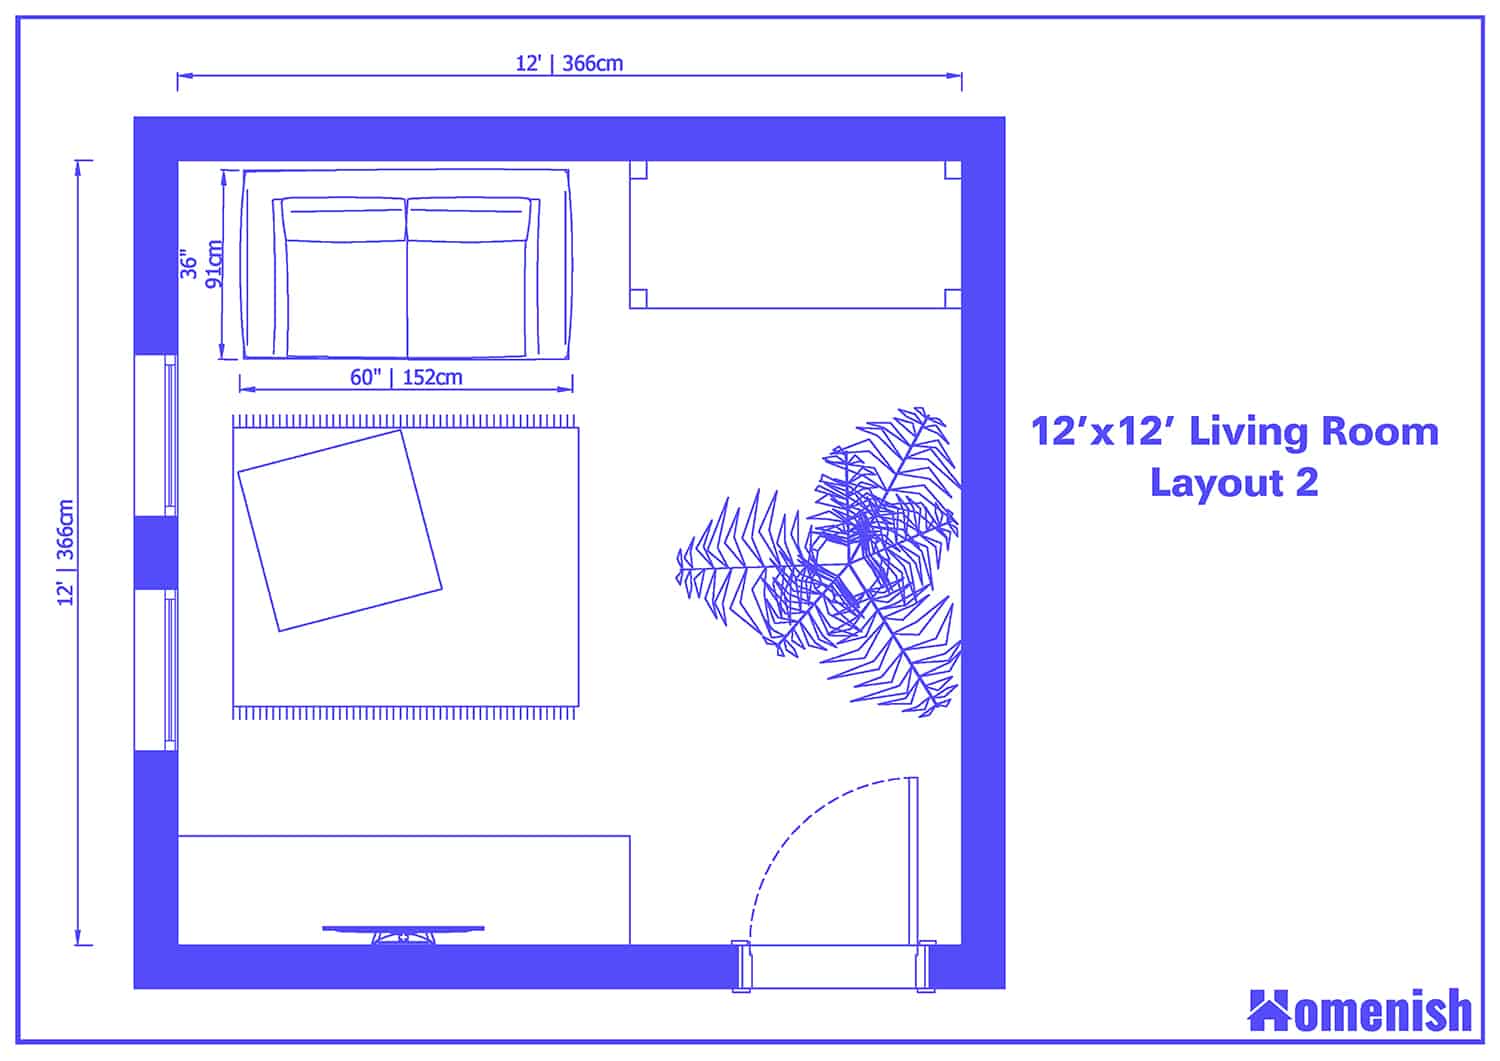 12' x 12' Living Room Layout 2